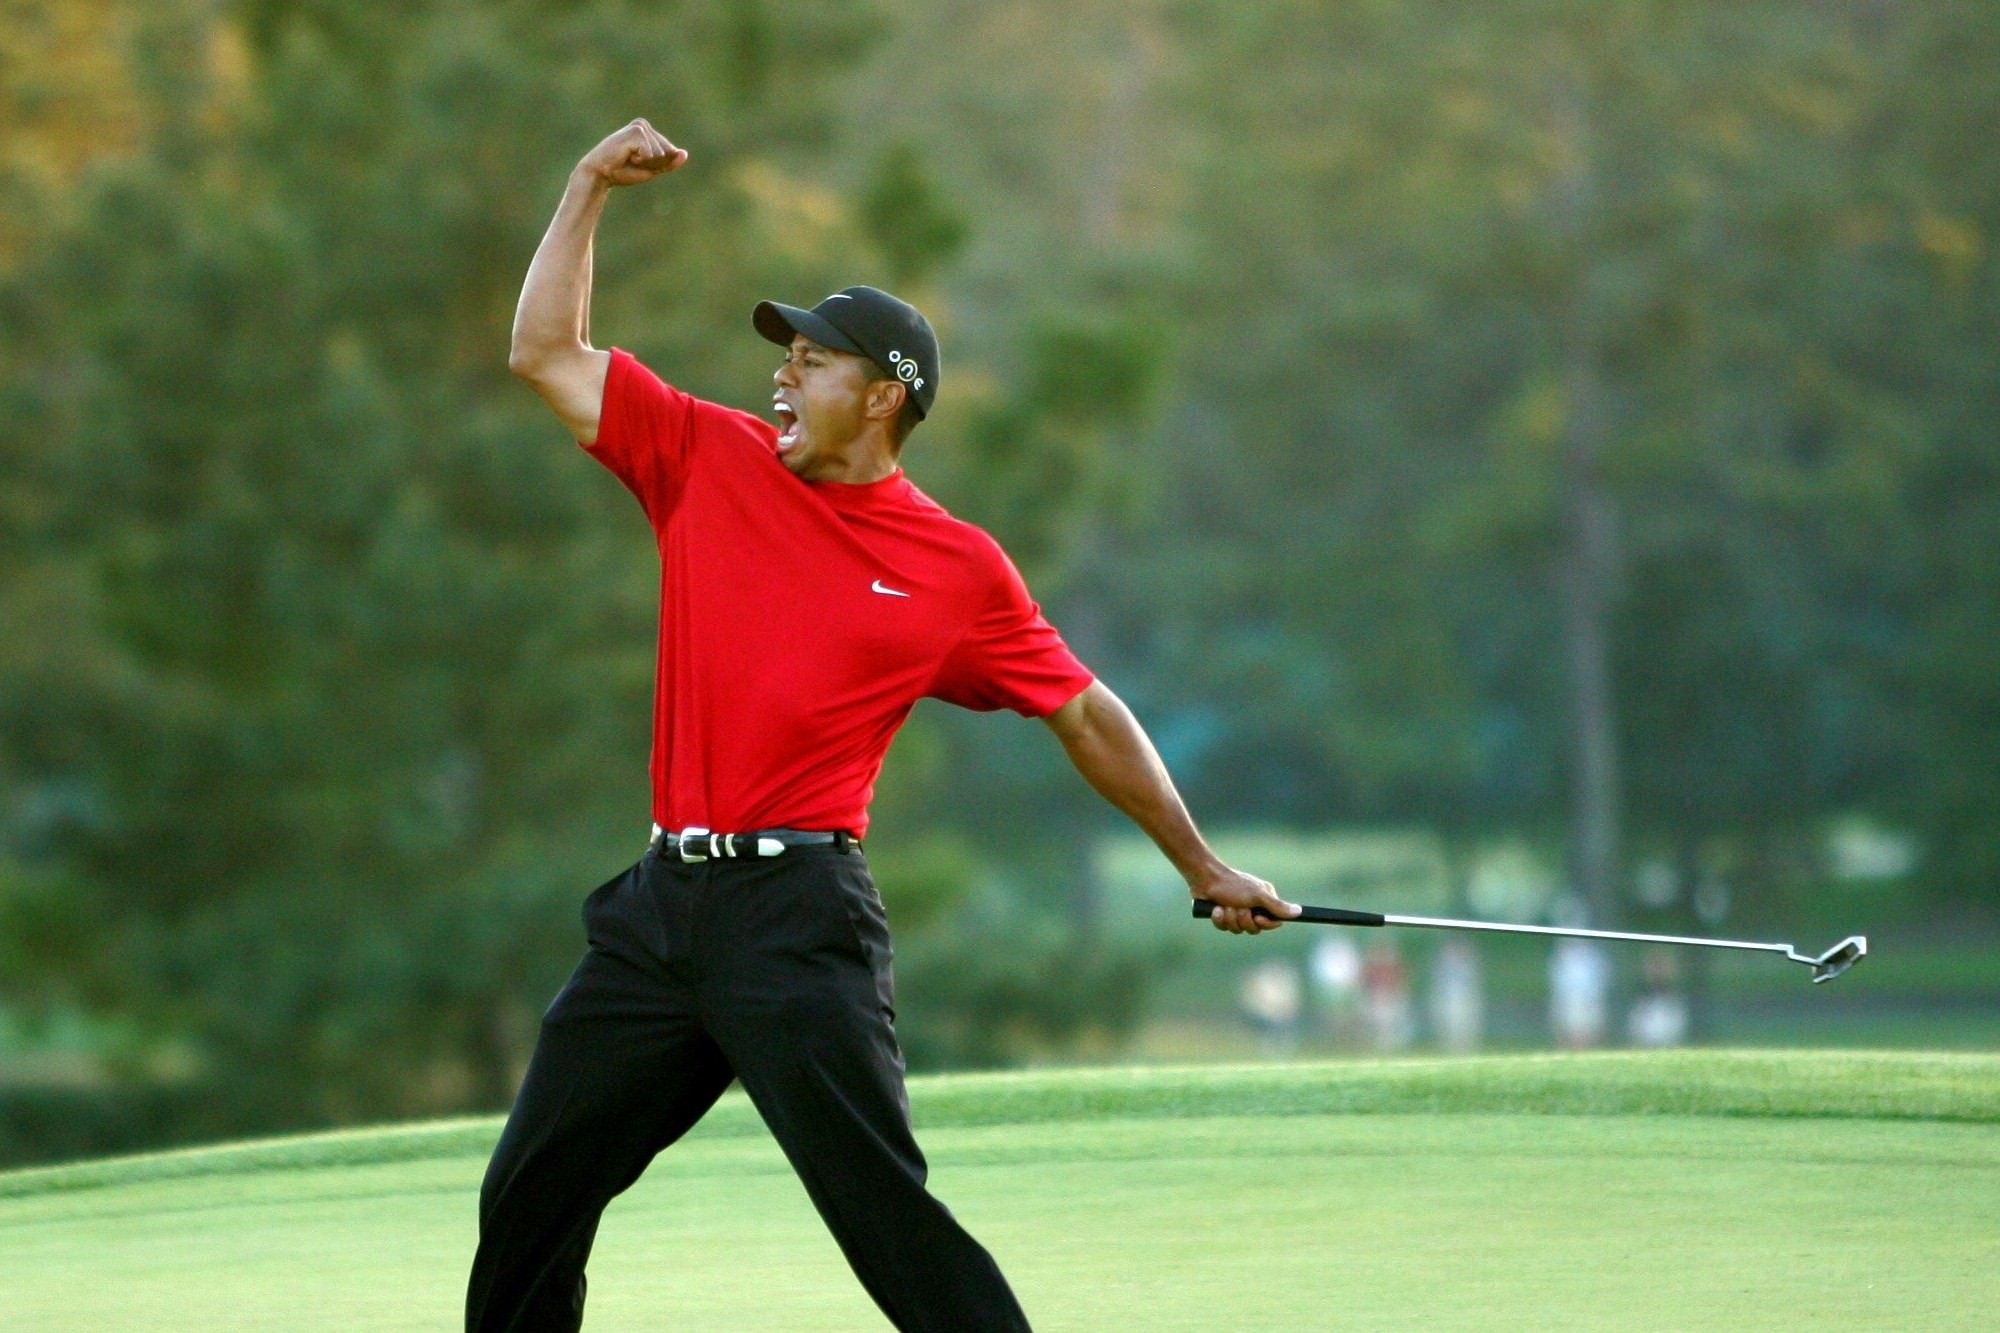 Tiger Woods schedule and results When will the GOAT play next?